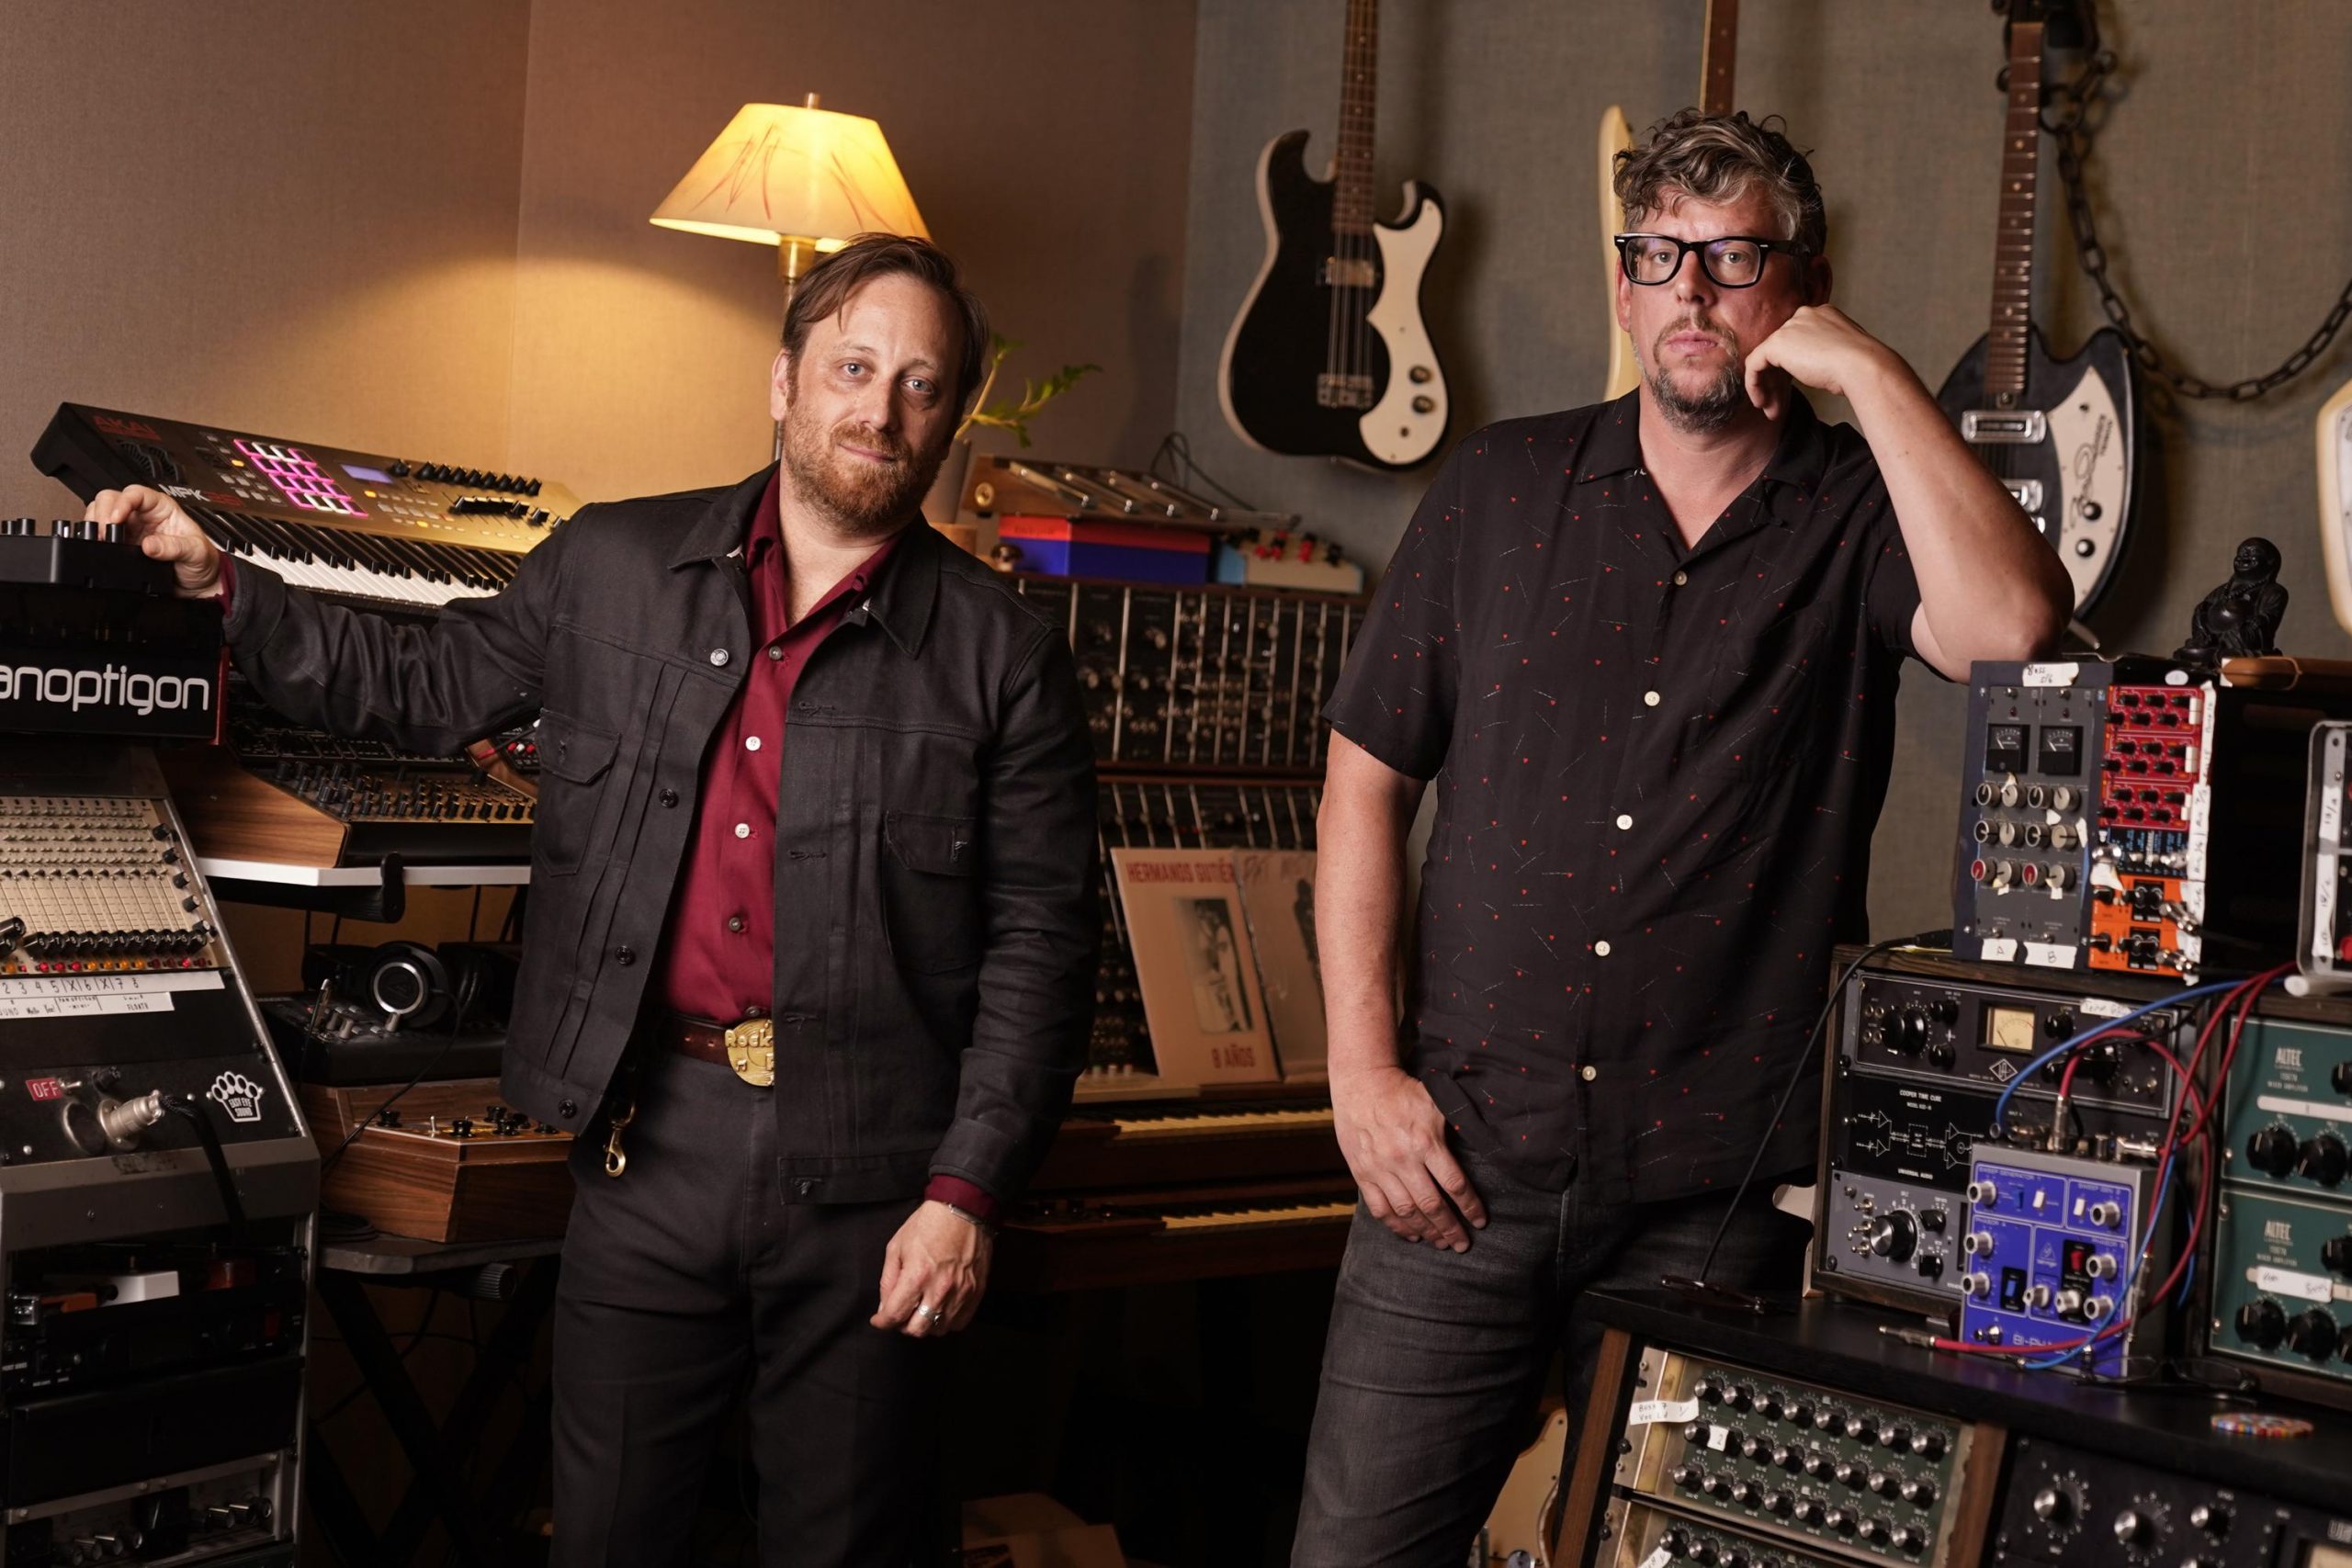 The Black Keys still raw, fast and loose on 'Dropout Boogie'